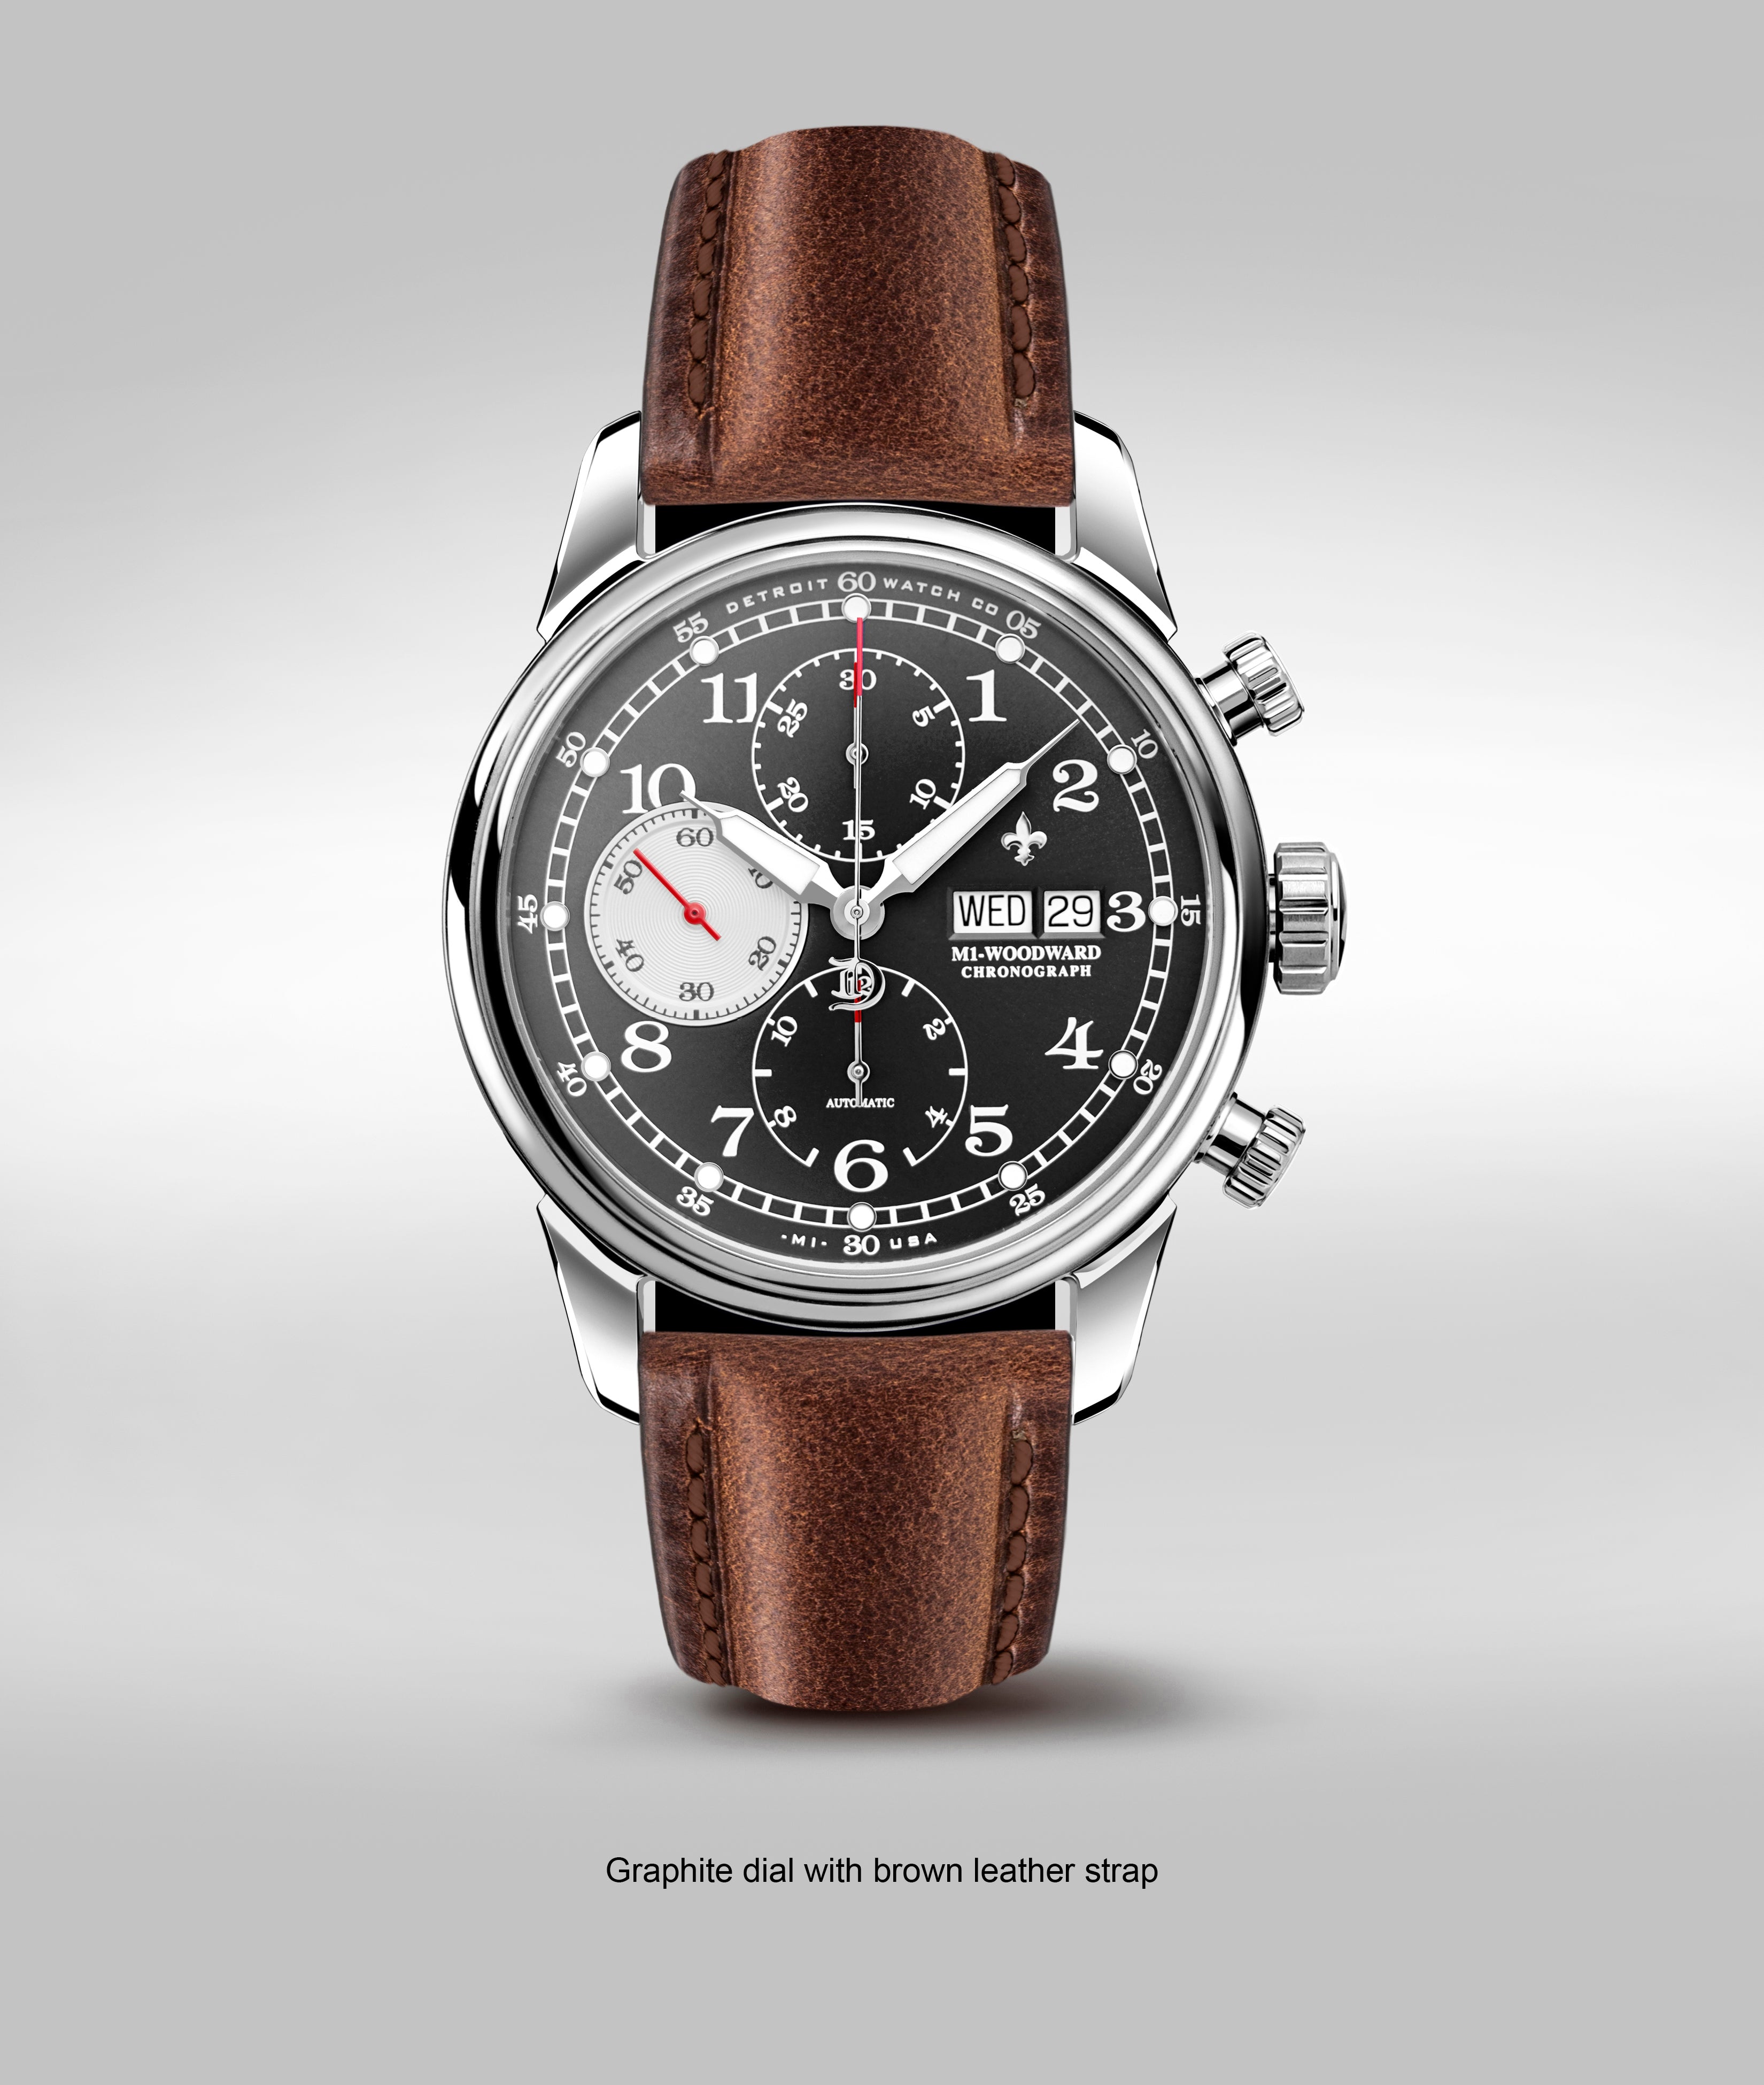 Detroit Watch Company] Thinking about ordering this beautiful M1-Woodward  Le Mans edition. Newer to watches and was wondering what others thought of  this watch/brand. : r/Watches